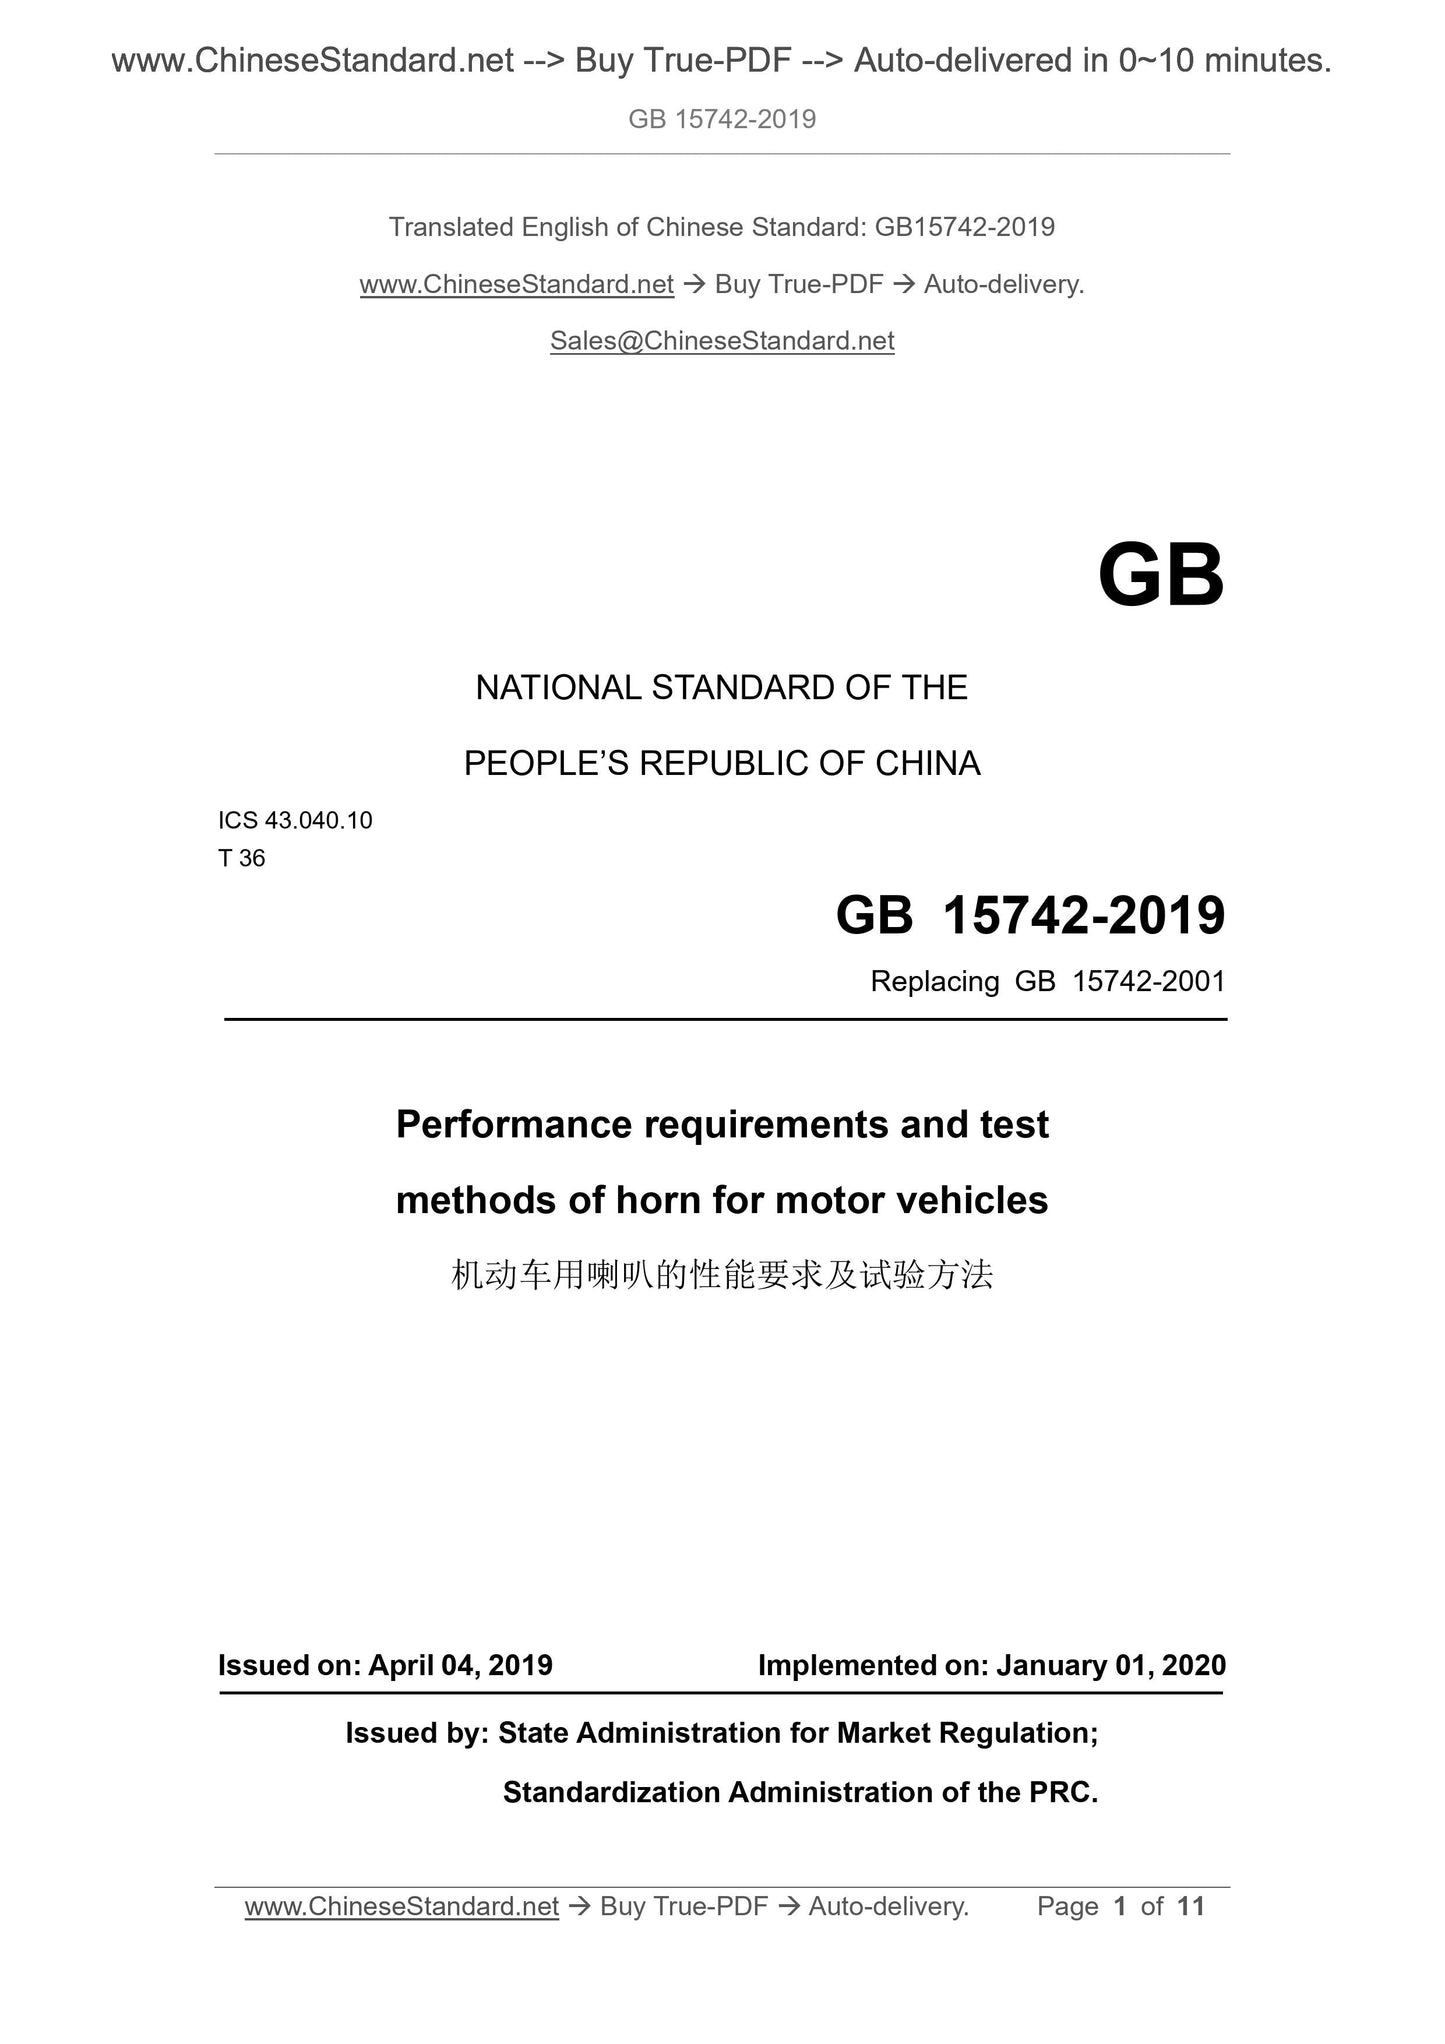 GB 15742-2019 Page 1